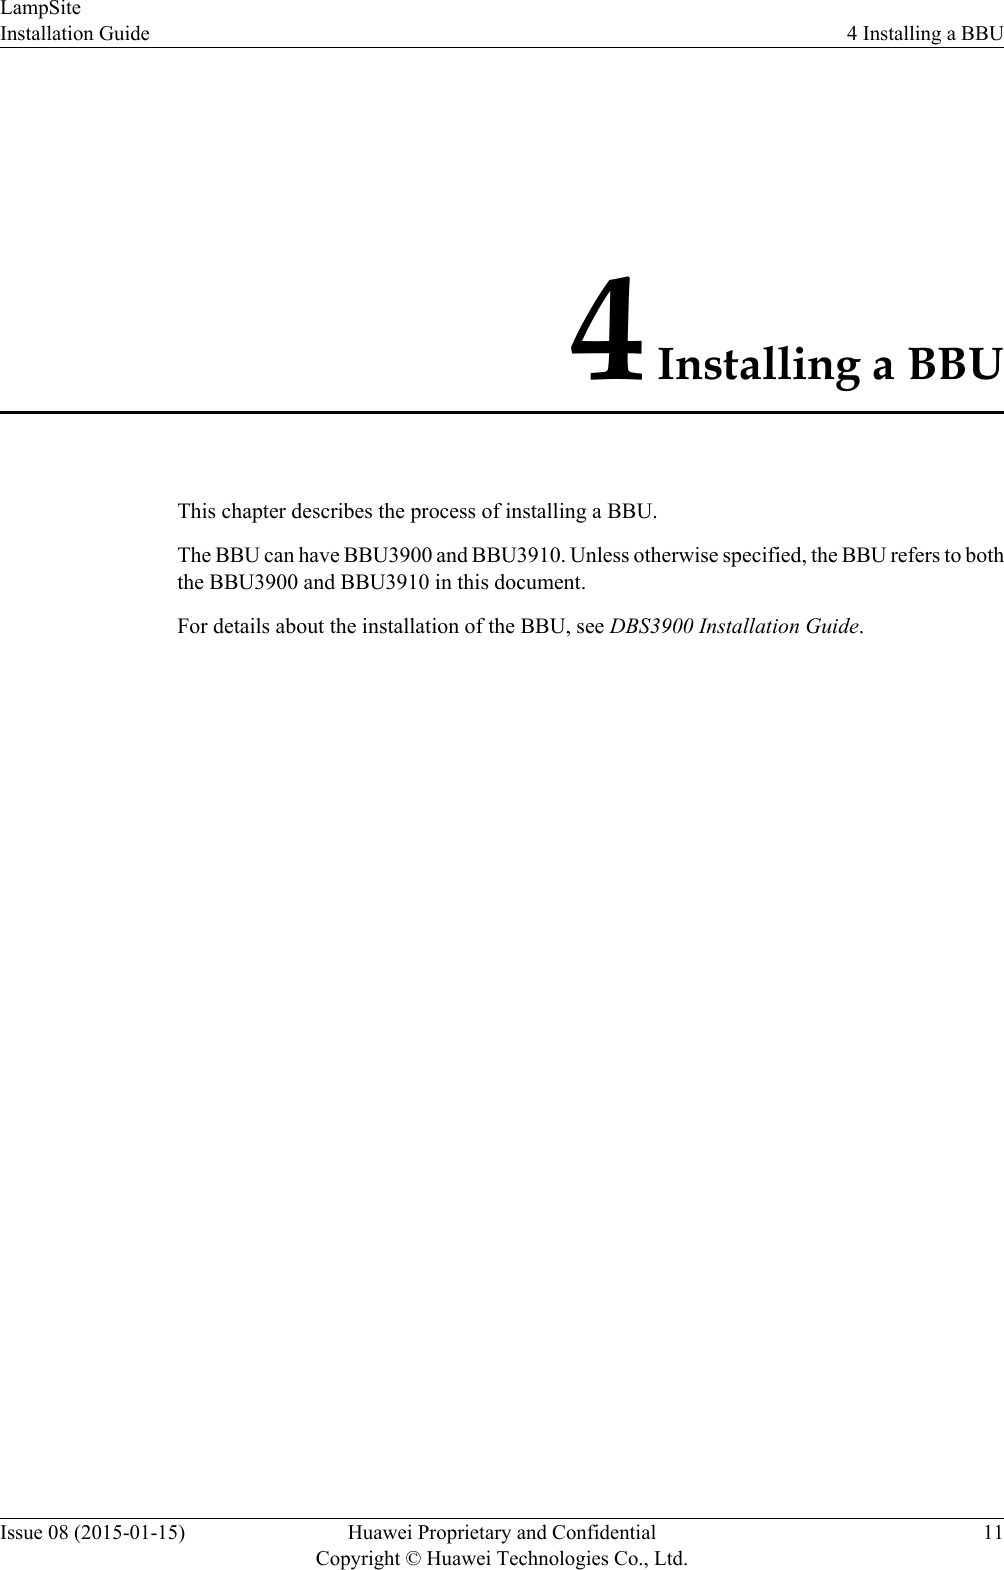 4 Installing a BBUThis chapter describes the process of installing a BBU.The BBU can have BBU3900 and BBU3910. Unless otherwise specified, the BBU refers to boththe BBU3900 and BBU3910 in this document.For details about the installation of the BBU, see DBS3900 Installation Guide.LampSiteInstallation Guide 4 Installing a BBUIssue 08 (2015-01-15) Huawei Proprietary and ConfidentialCopyright © Huawei Technologies Co., Ltd.11